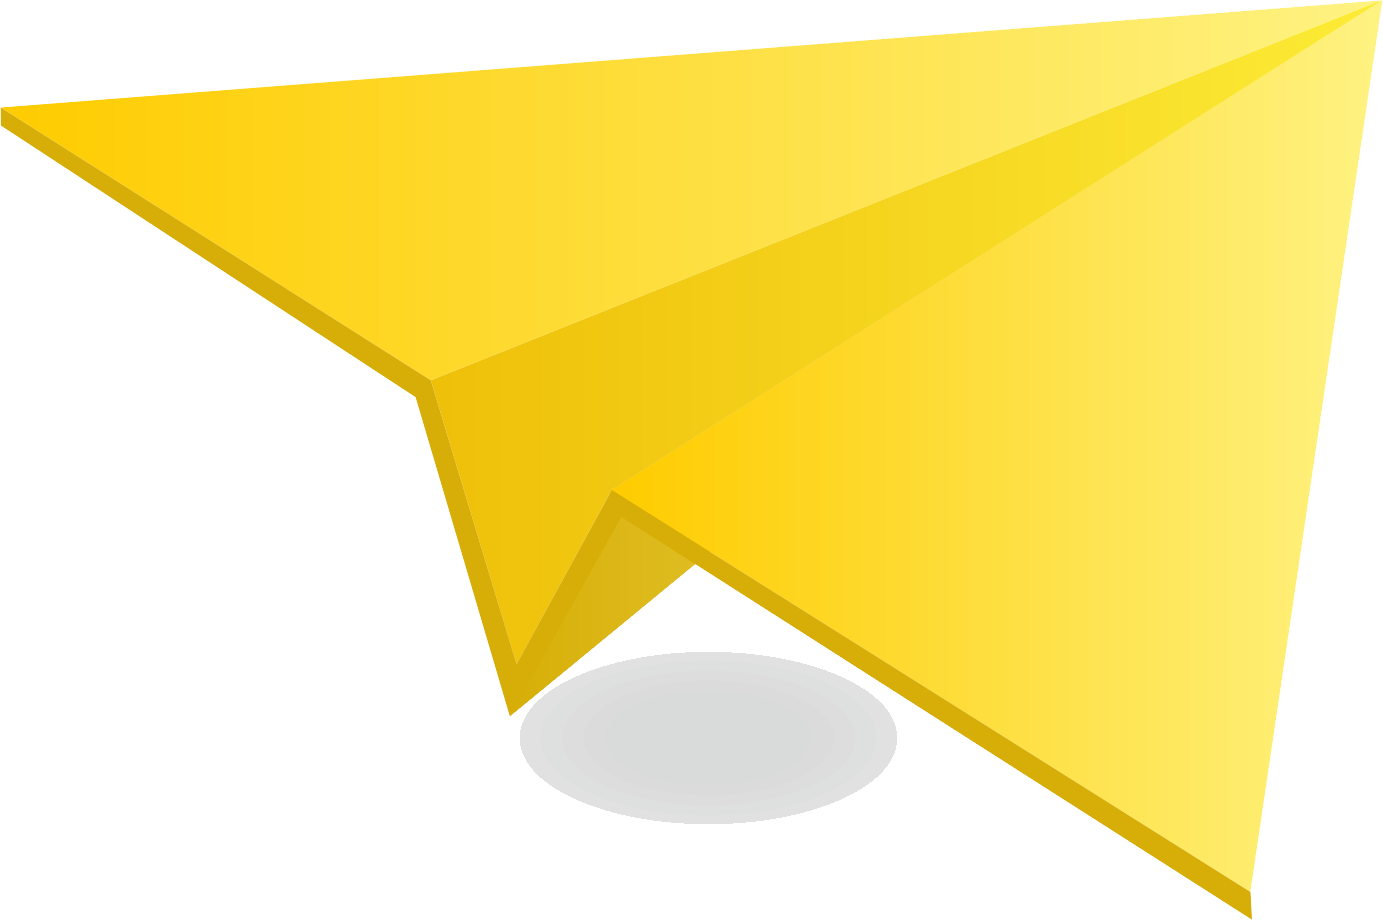 This High Quality Free Png Image Without Any Background - Paper Plane (1383x920)